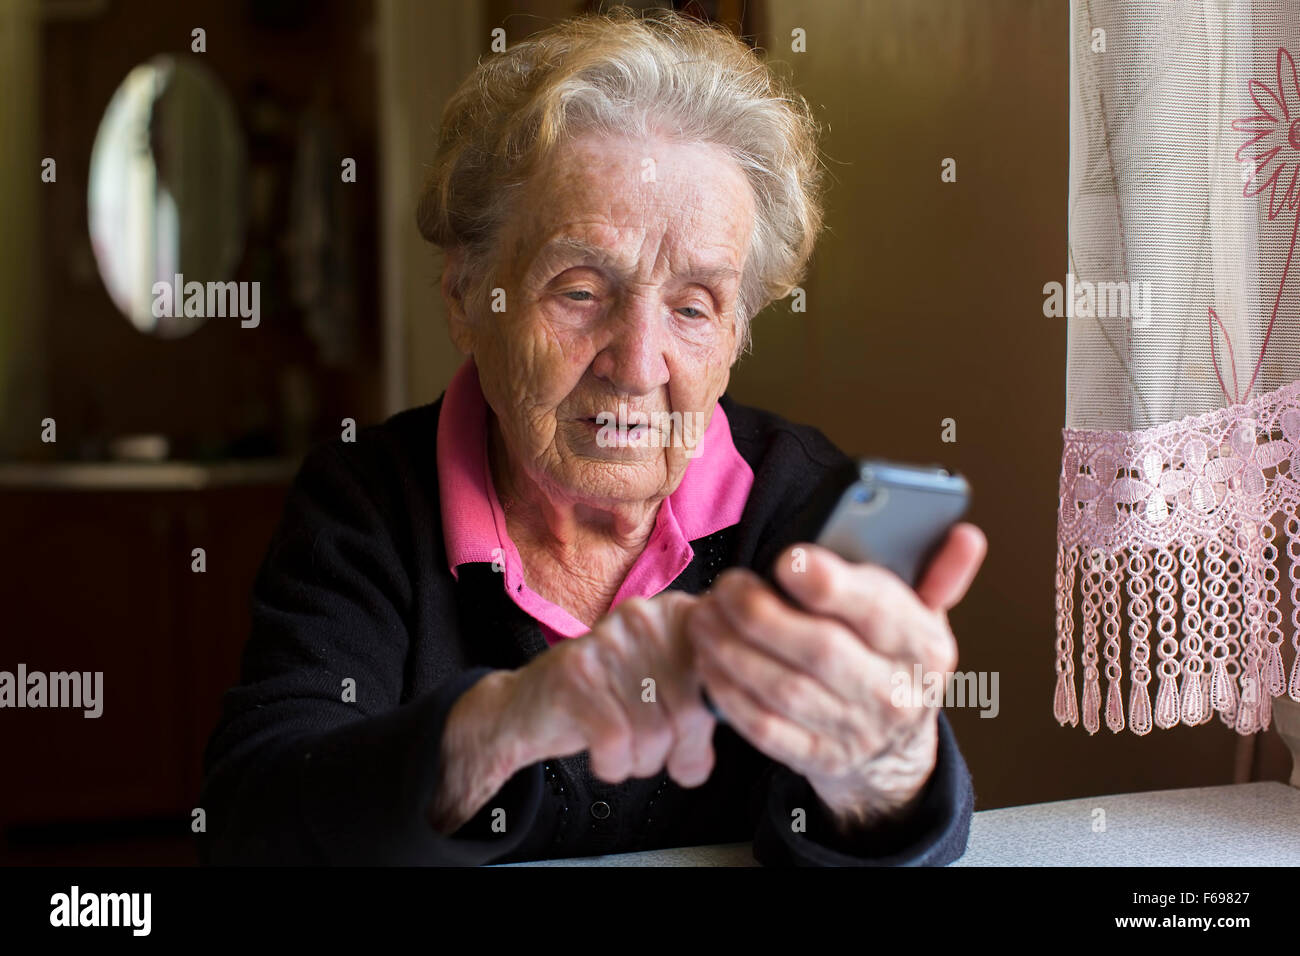 Elderly woman typing on the smartphone. Stock Photo